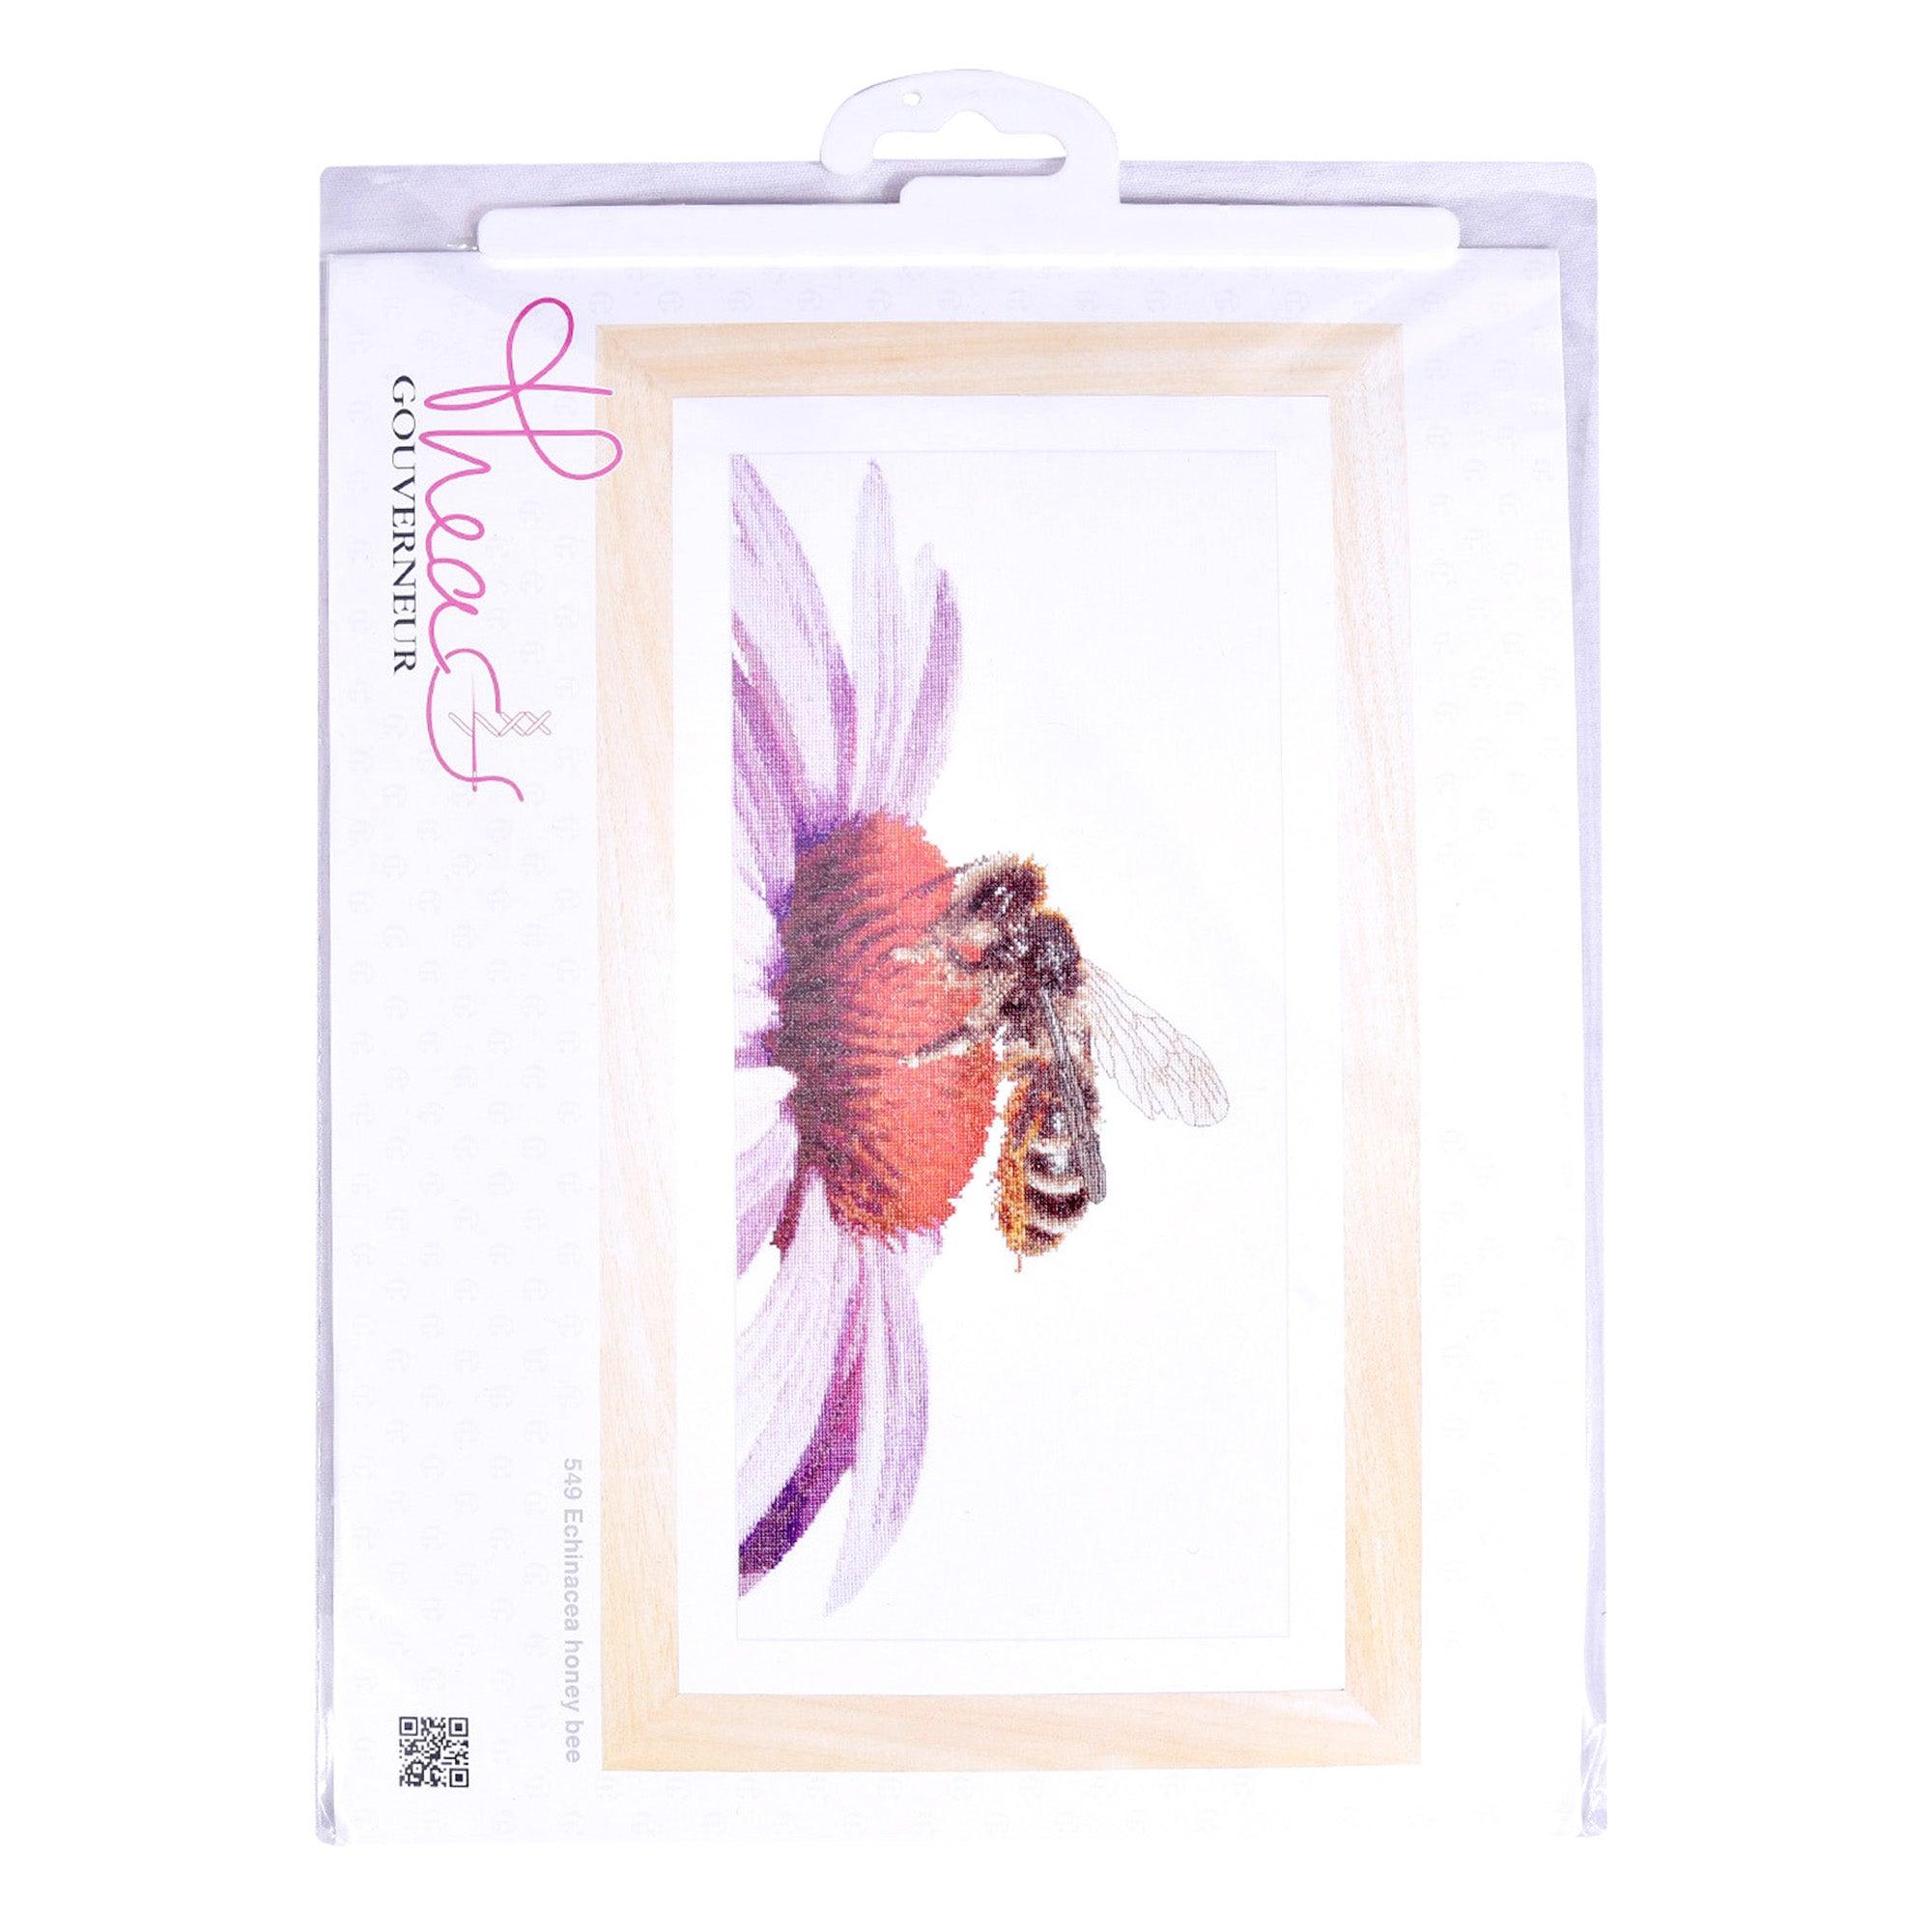 Thea Gouverneur - Counted Cross Stitch Kit - Bee on Echinacea - Linen - 36 count - 549 - Thea Gouverneur Since 1959